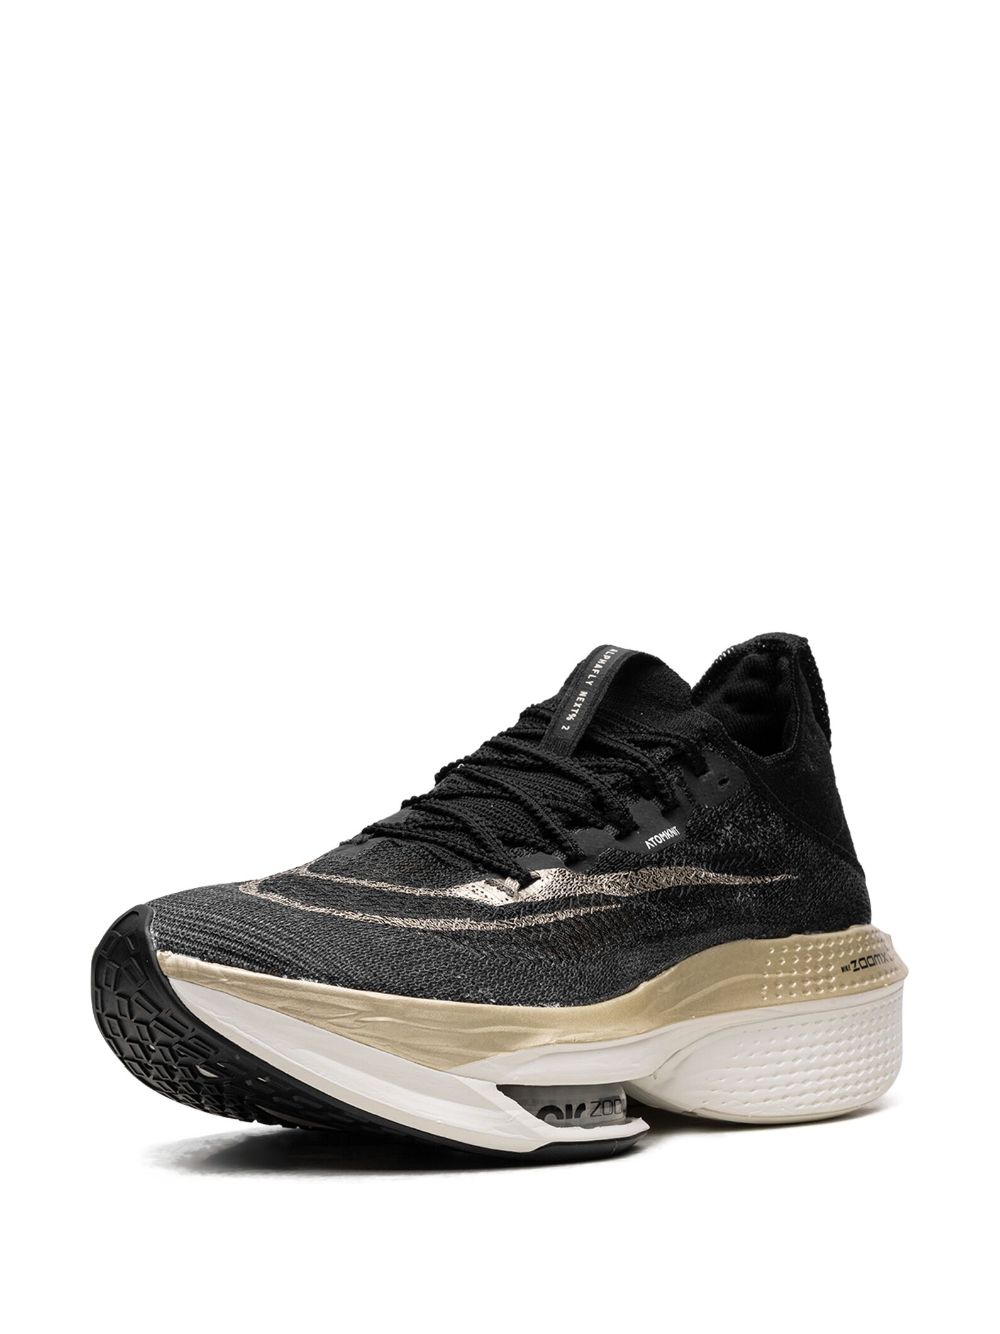 Shop Nike Zoom Alphafly Next% 2 "black Gold" Sneakers